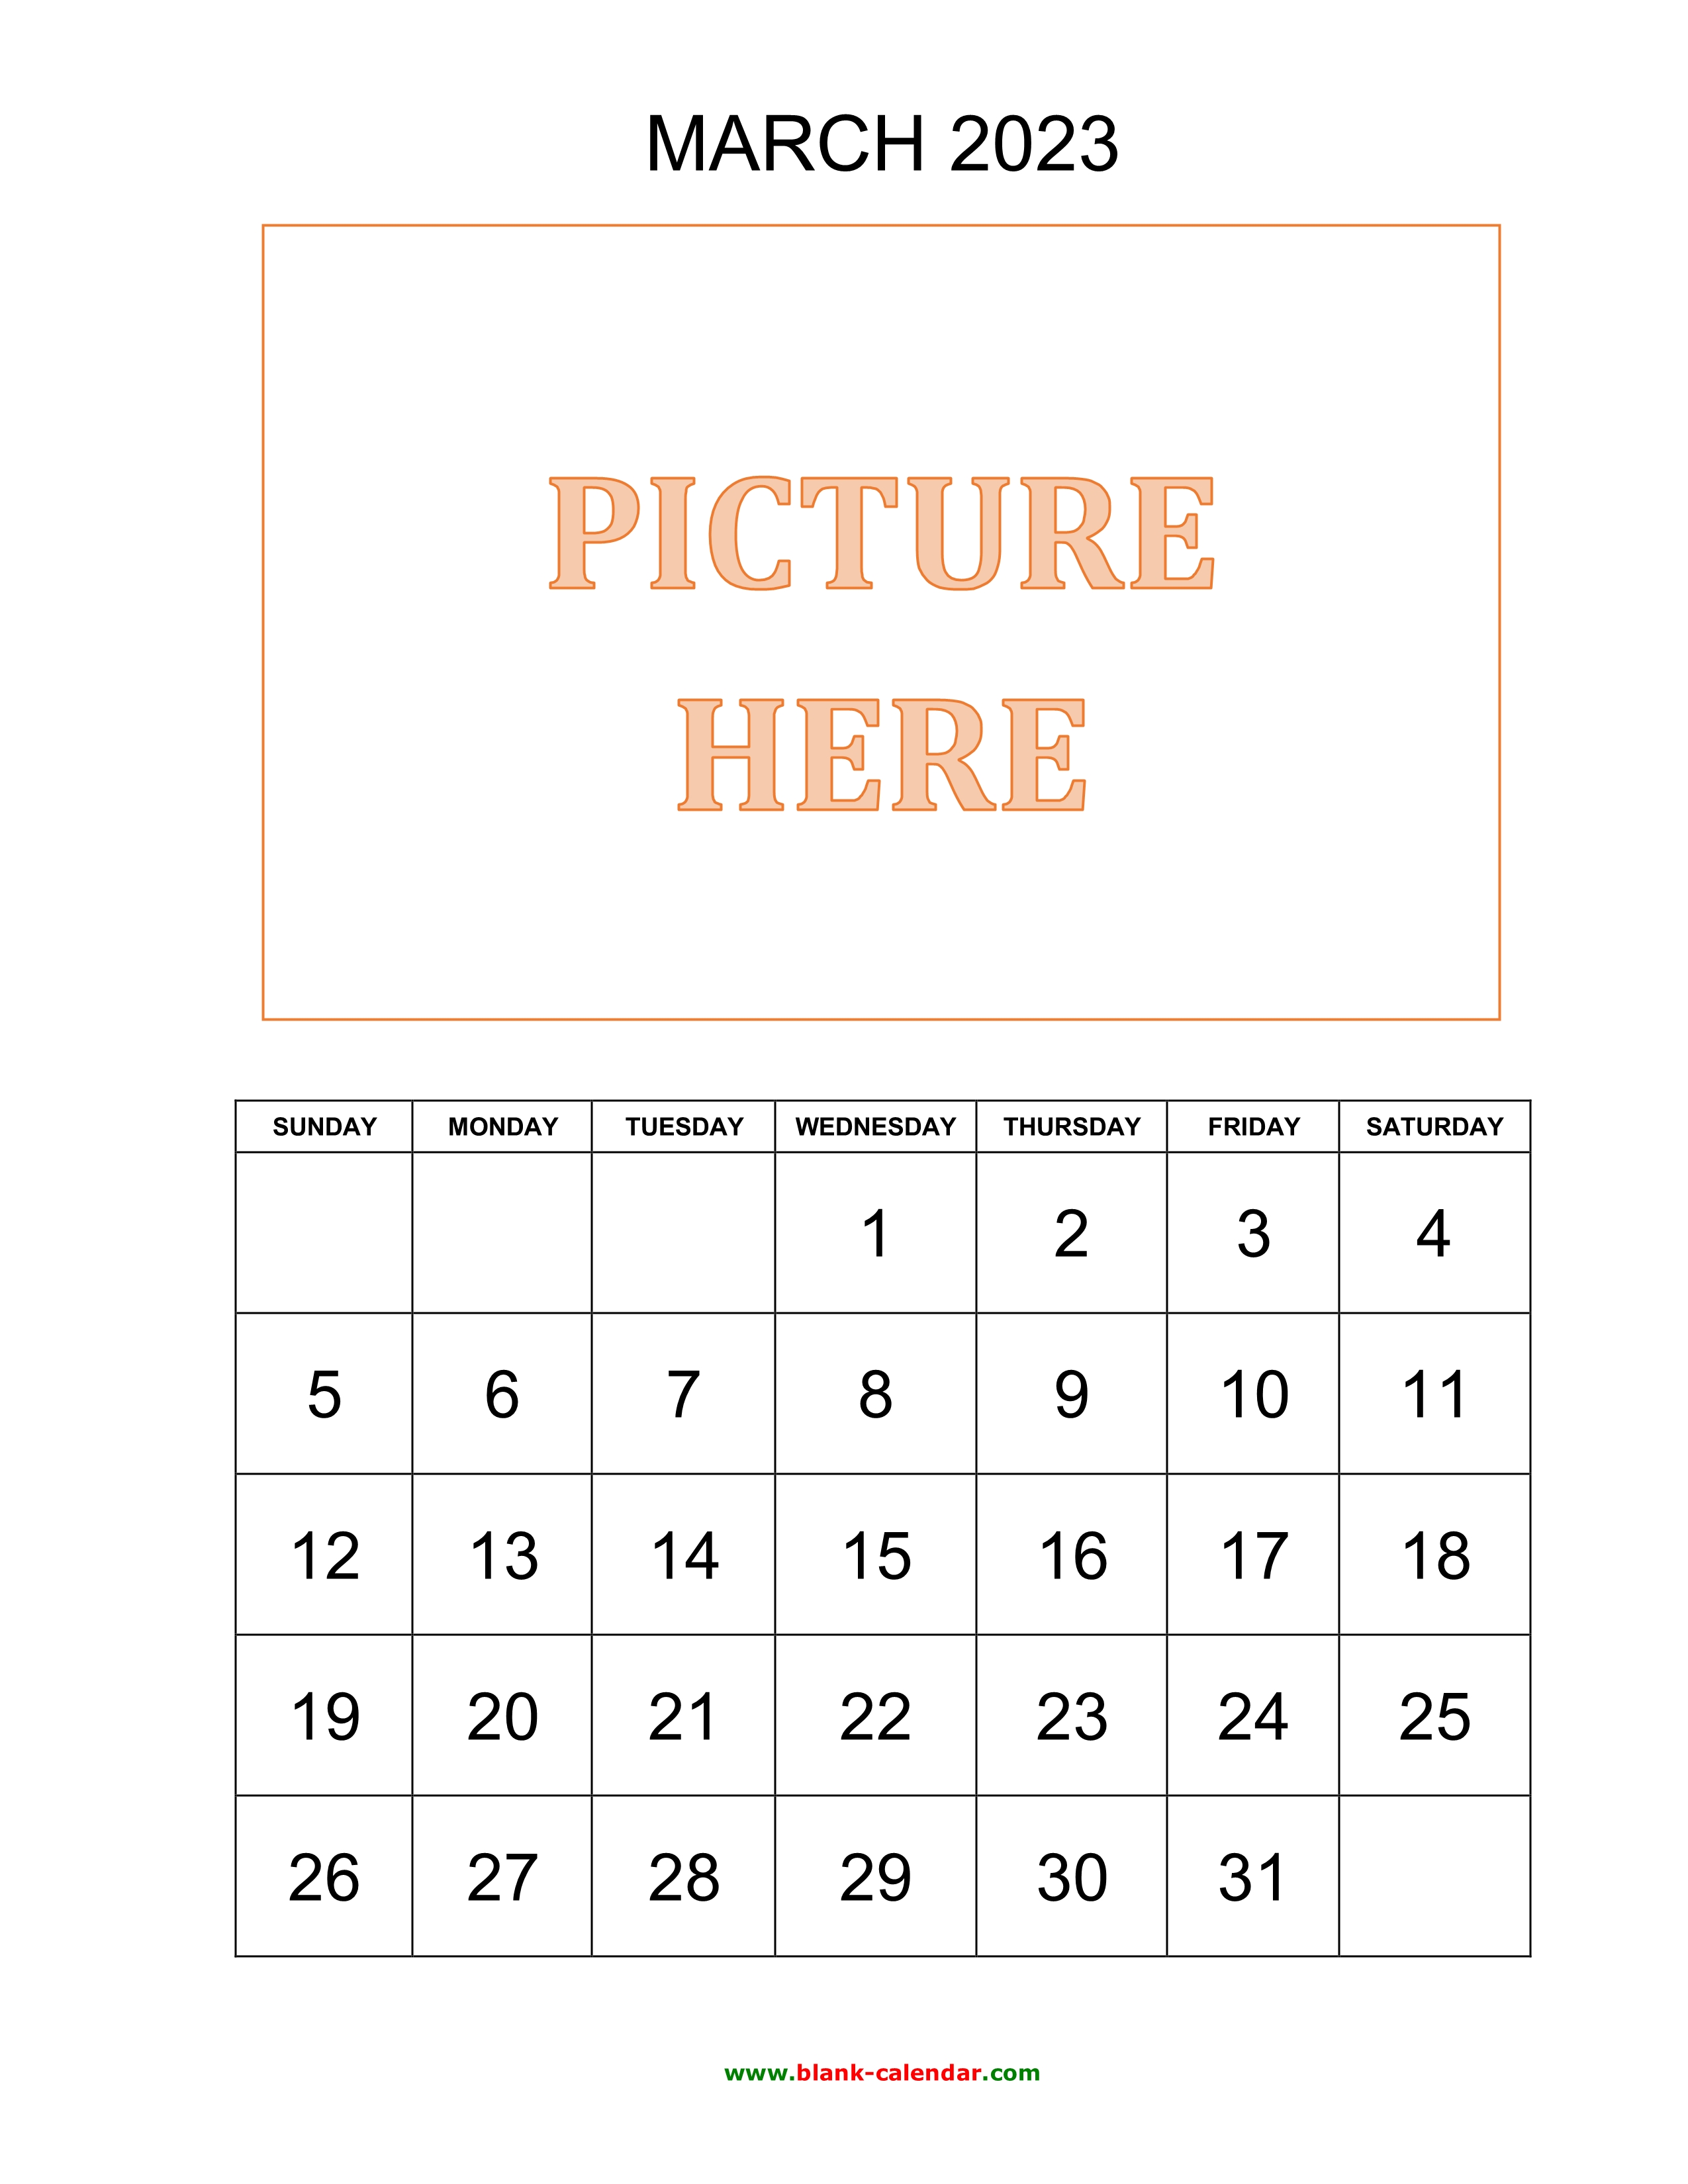 Free Download Printable March 2023 Calendar, pictures can be placed at the top